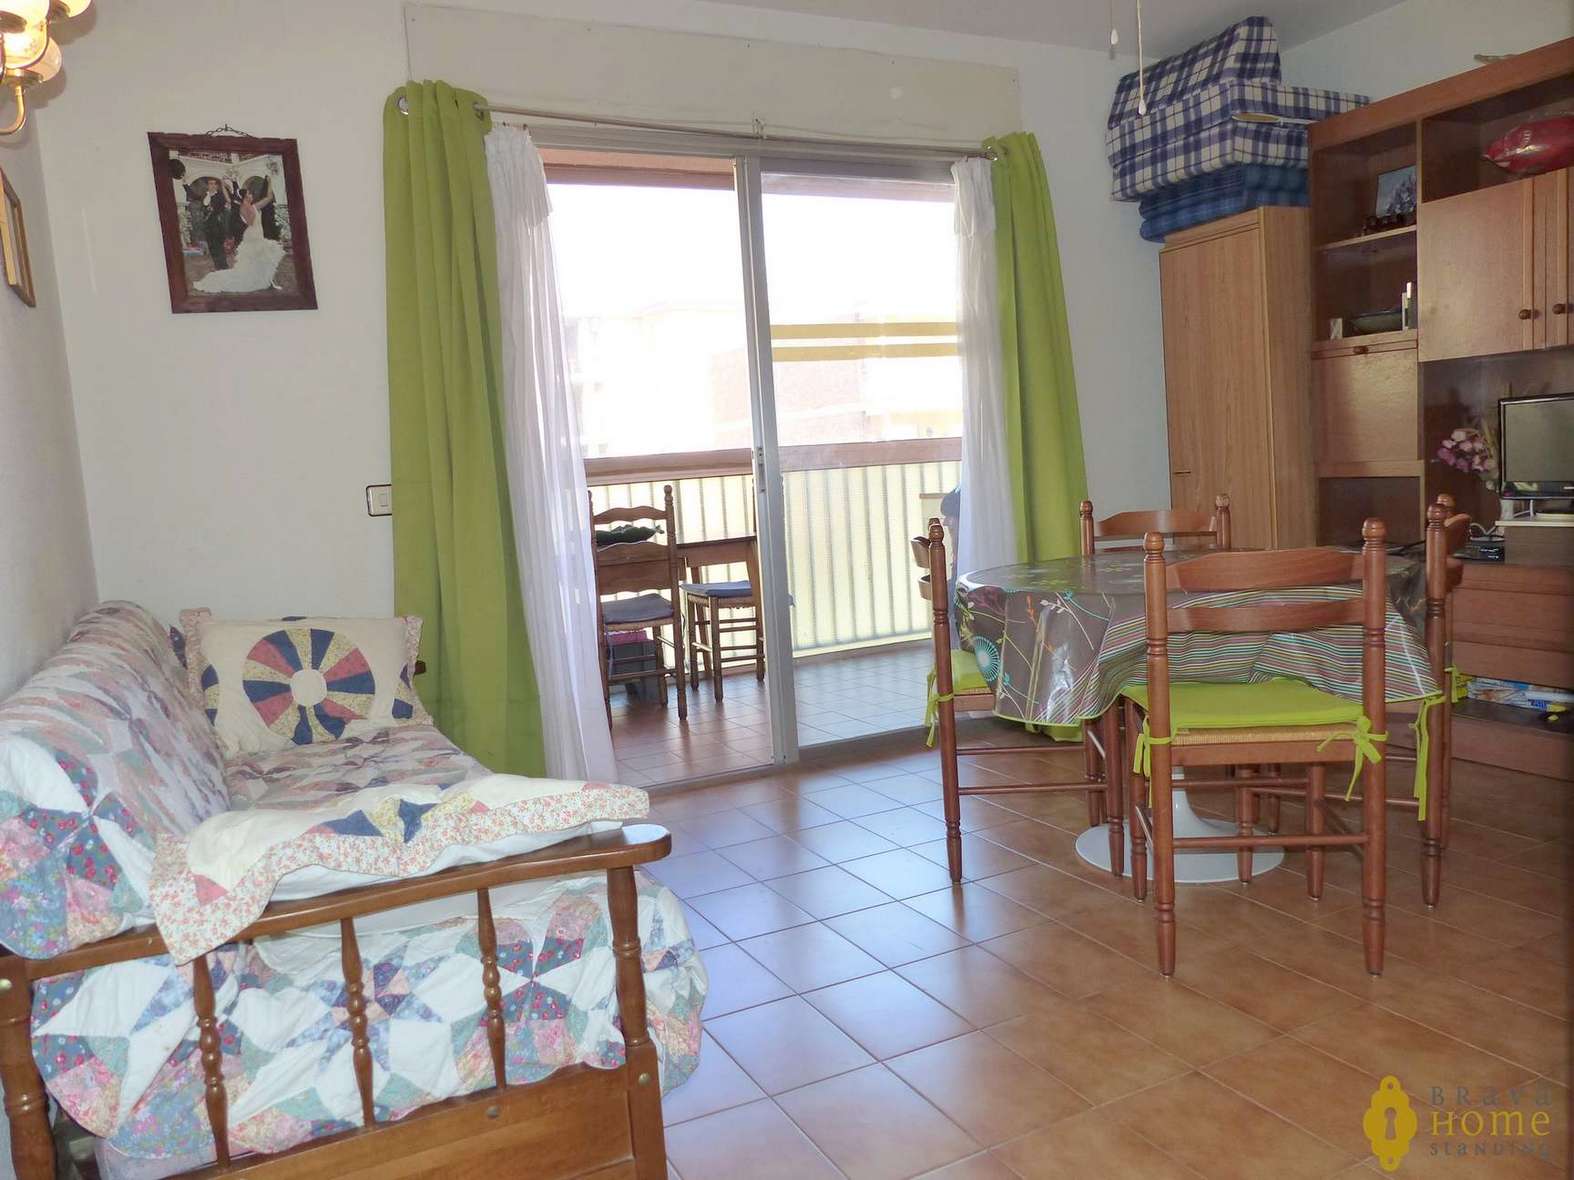 APARTMENT AT 300M FROM THE BEACH FOR SALE IN ROSAS - SANTA MARGARITA